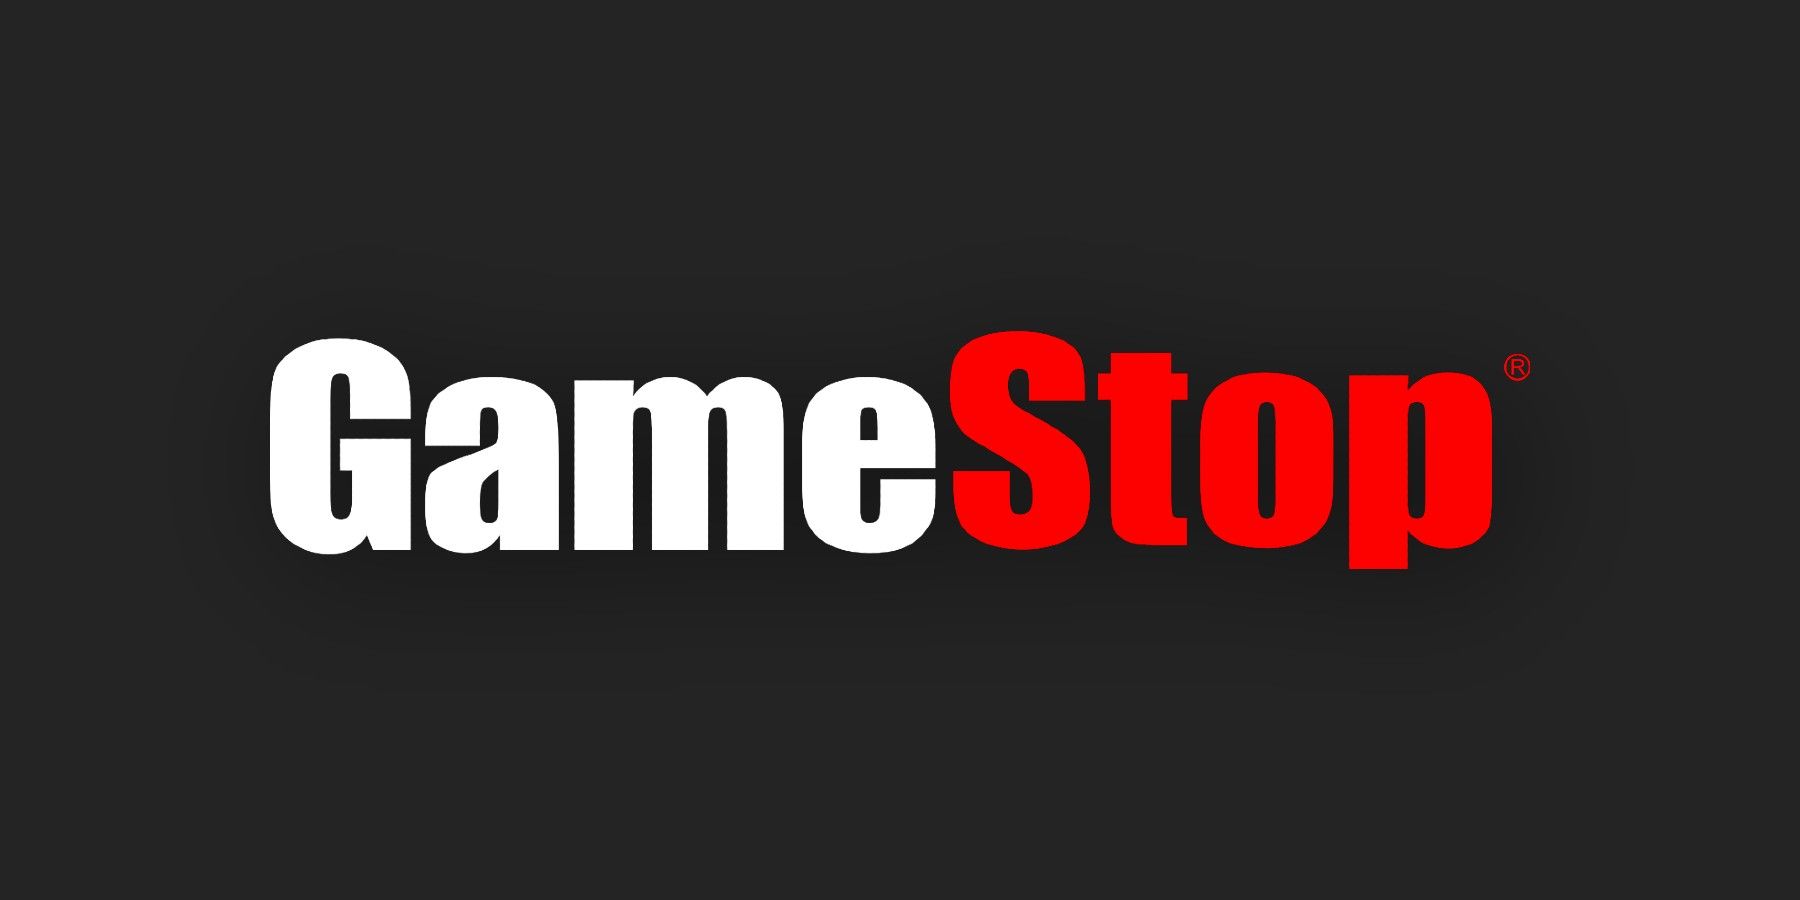 Some GameStop Stores Are Having Problems Fulfilling Pre-Orders